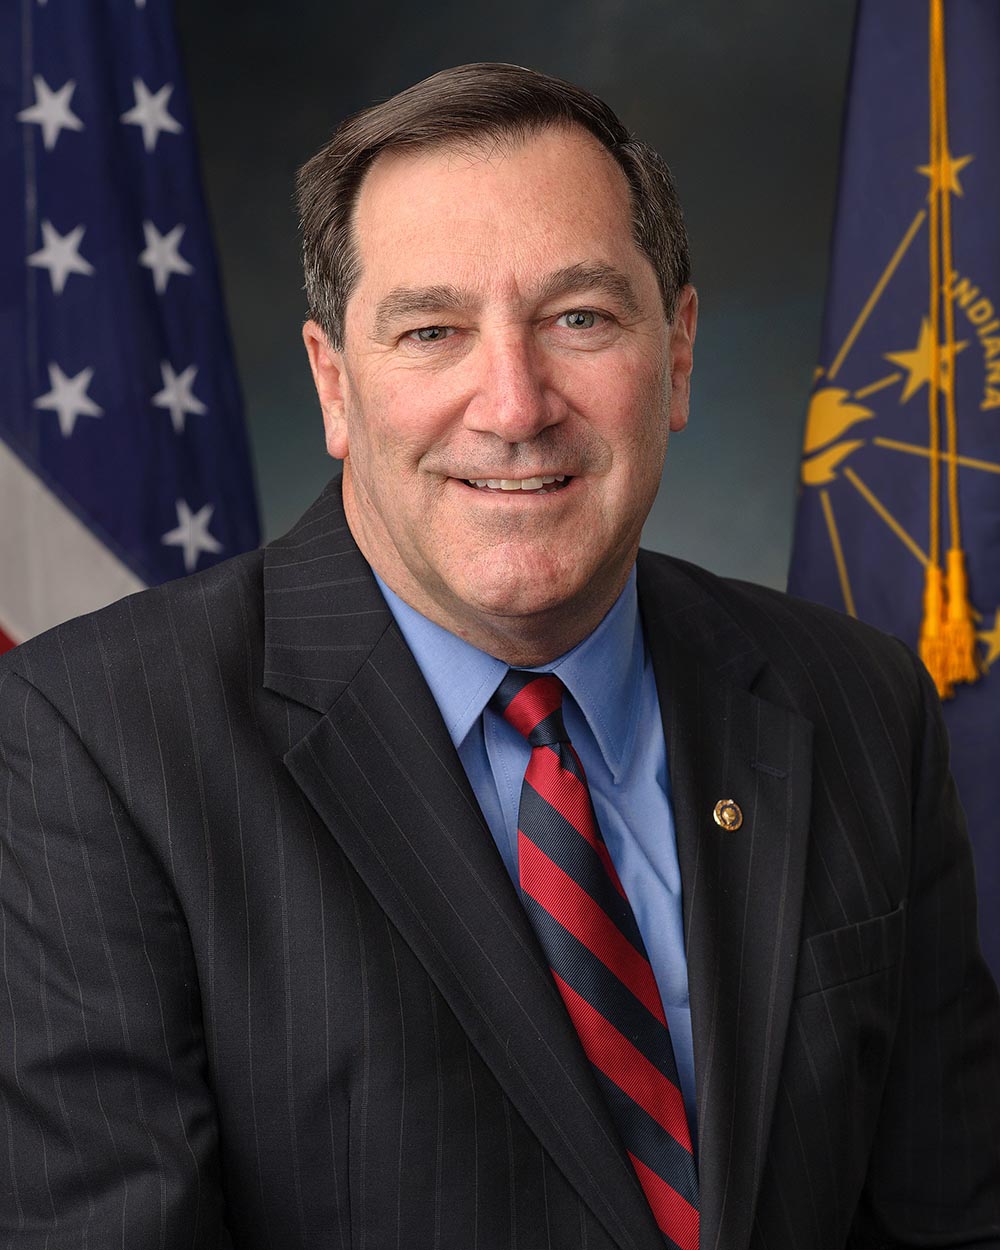 Indiana Sen. Joe Donnelly in an official portrait in 2013 (Wikimedia Commons/U.S. Senate Photographic Studio)